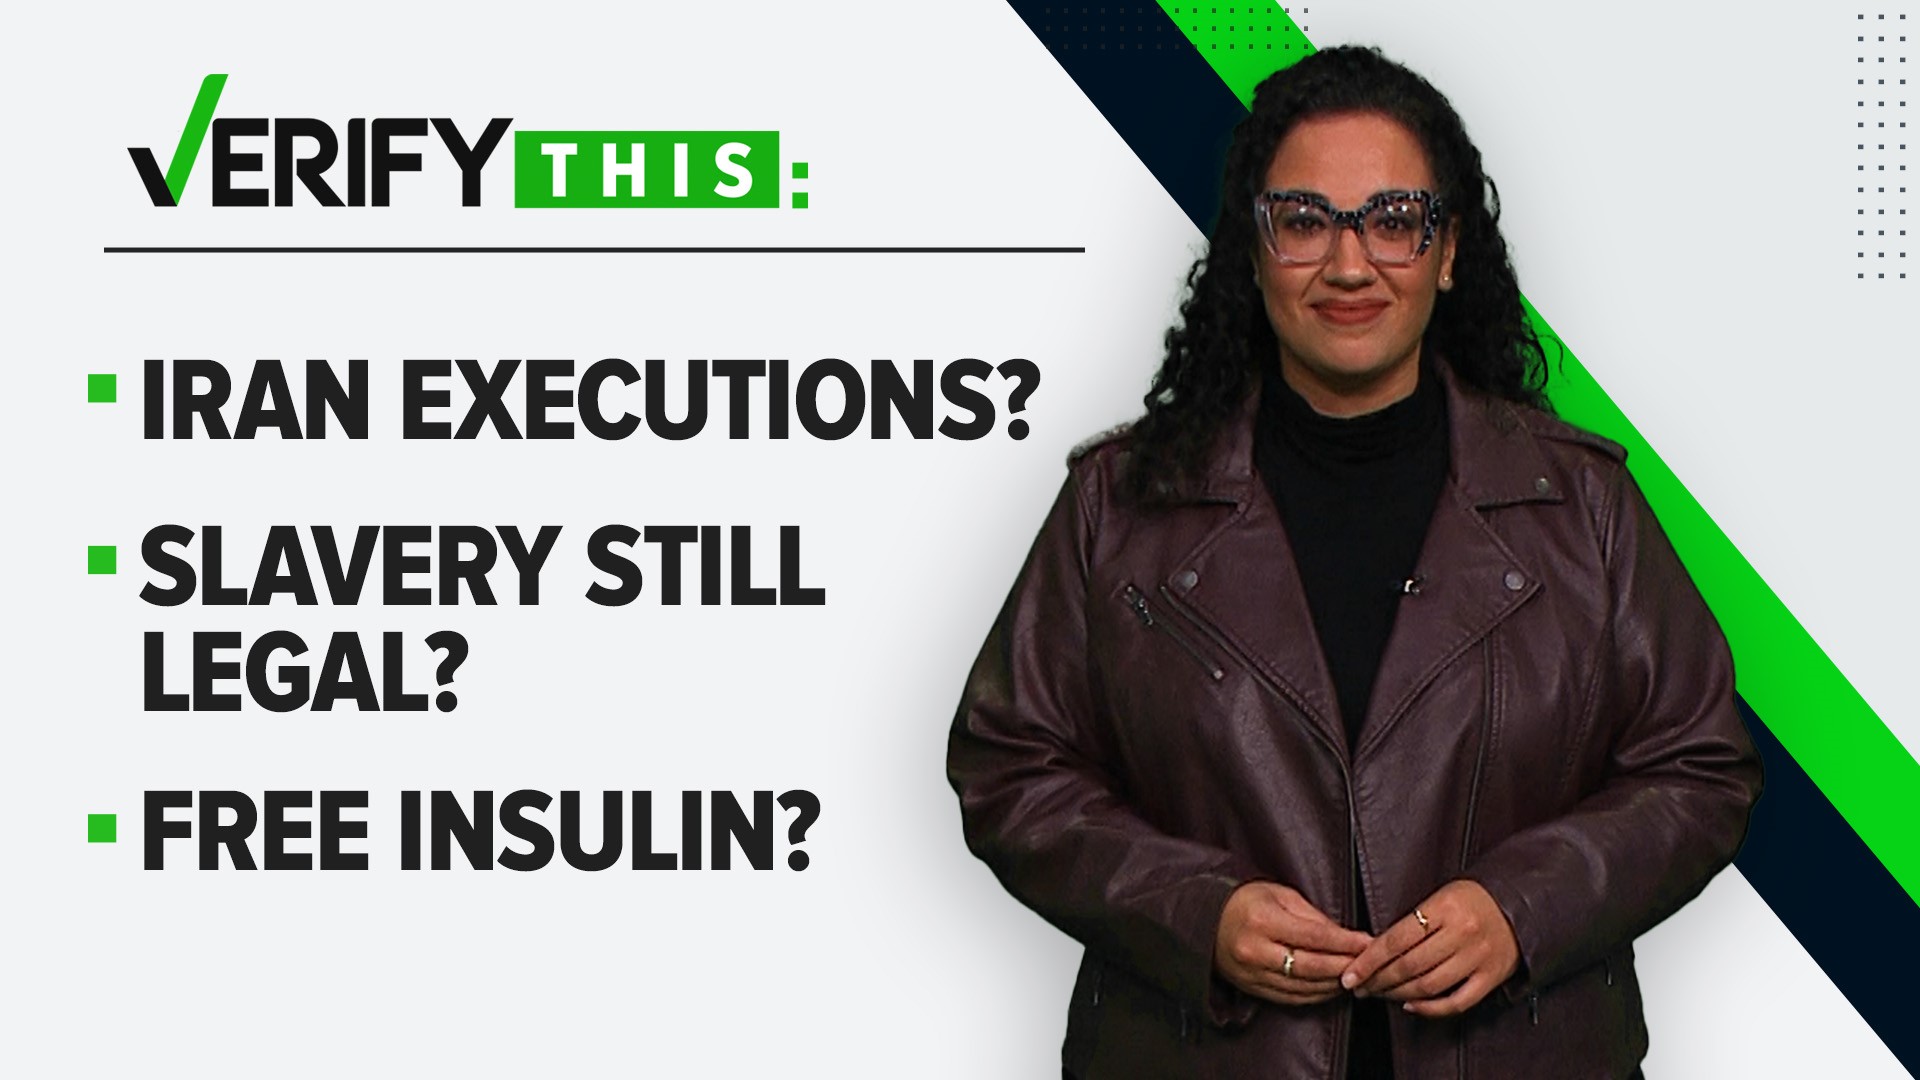 Fact-checking claims and answering questions about death sentences for Iranian protesters, student loan forgiveness, slavery in US states, free insulin and more.